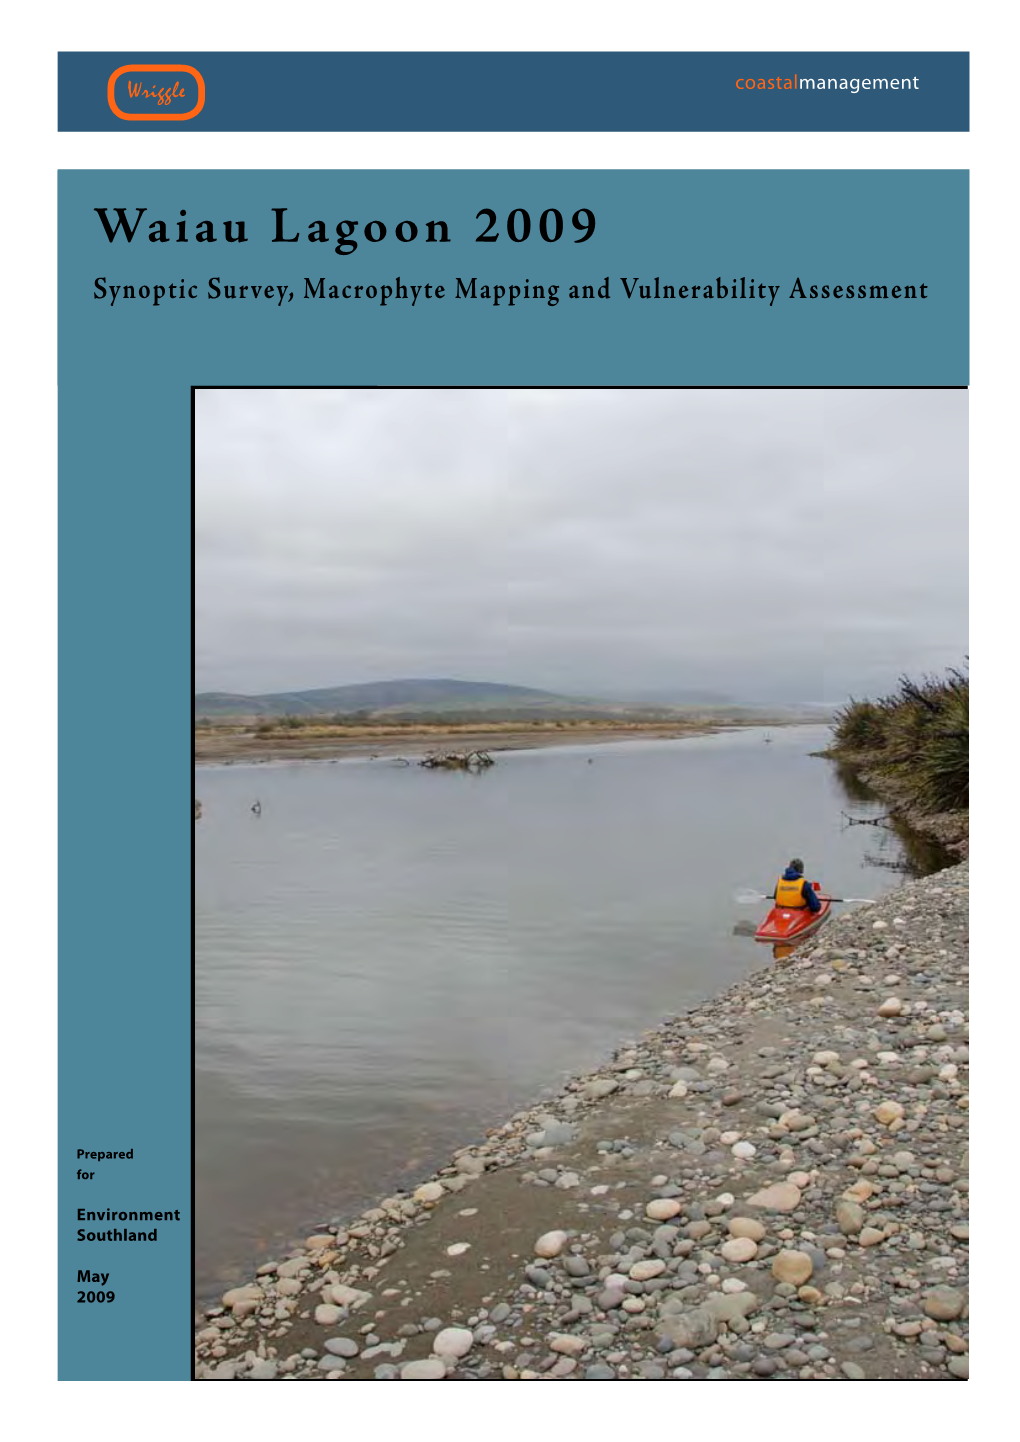 Waiau Lagoon 2009 Synoptic Survey, Macrophyte Mapping and Vulnerability Assessment